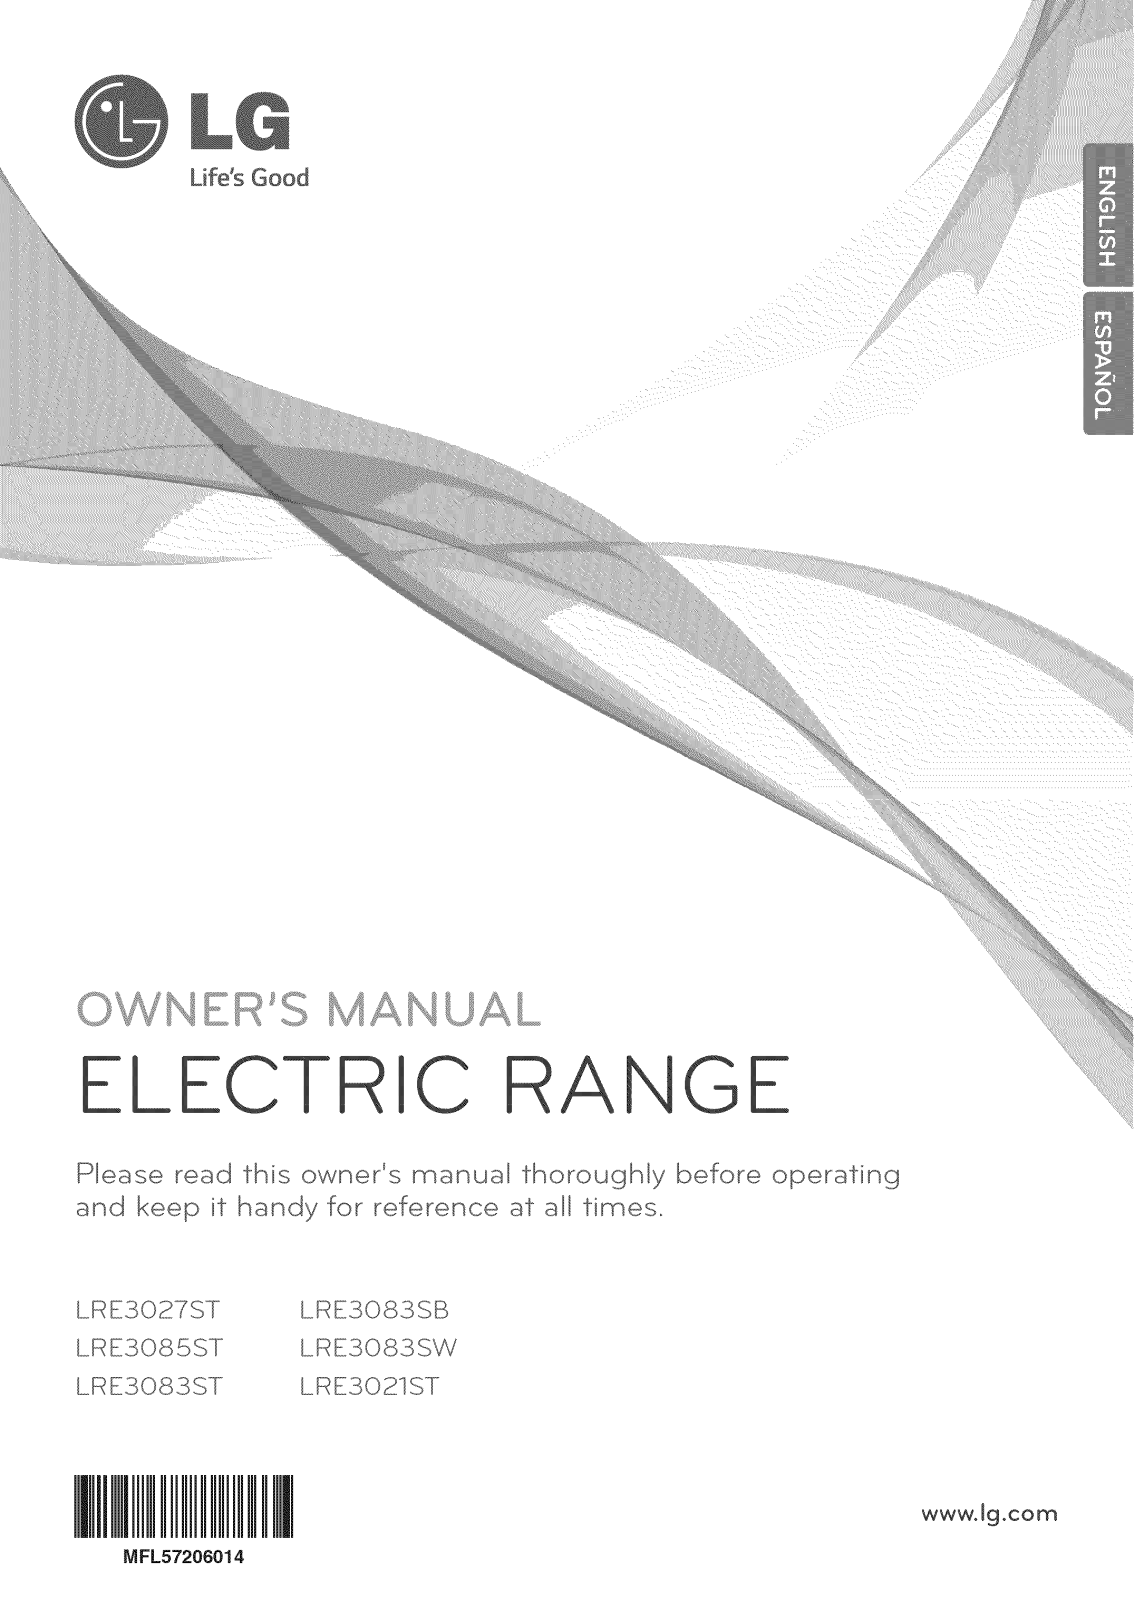 LG LRE3083ST/01 Owner’s Manual